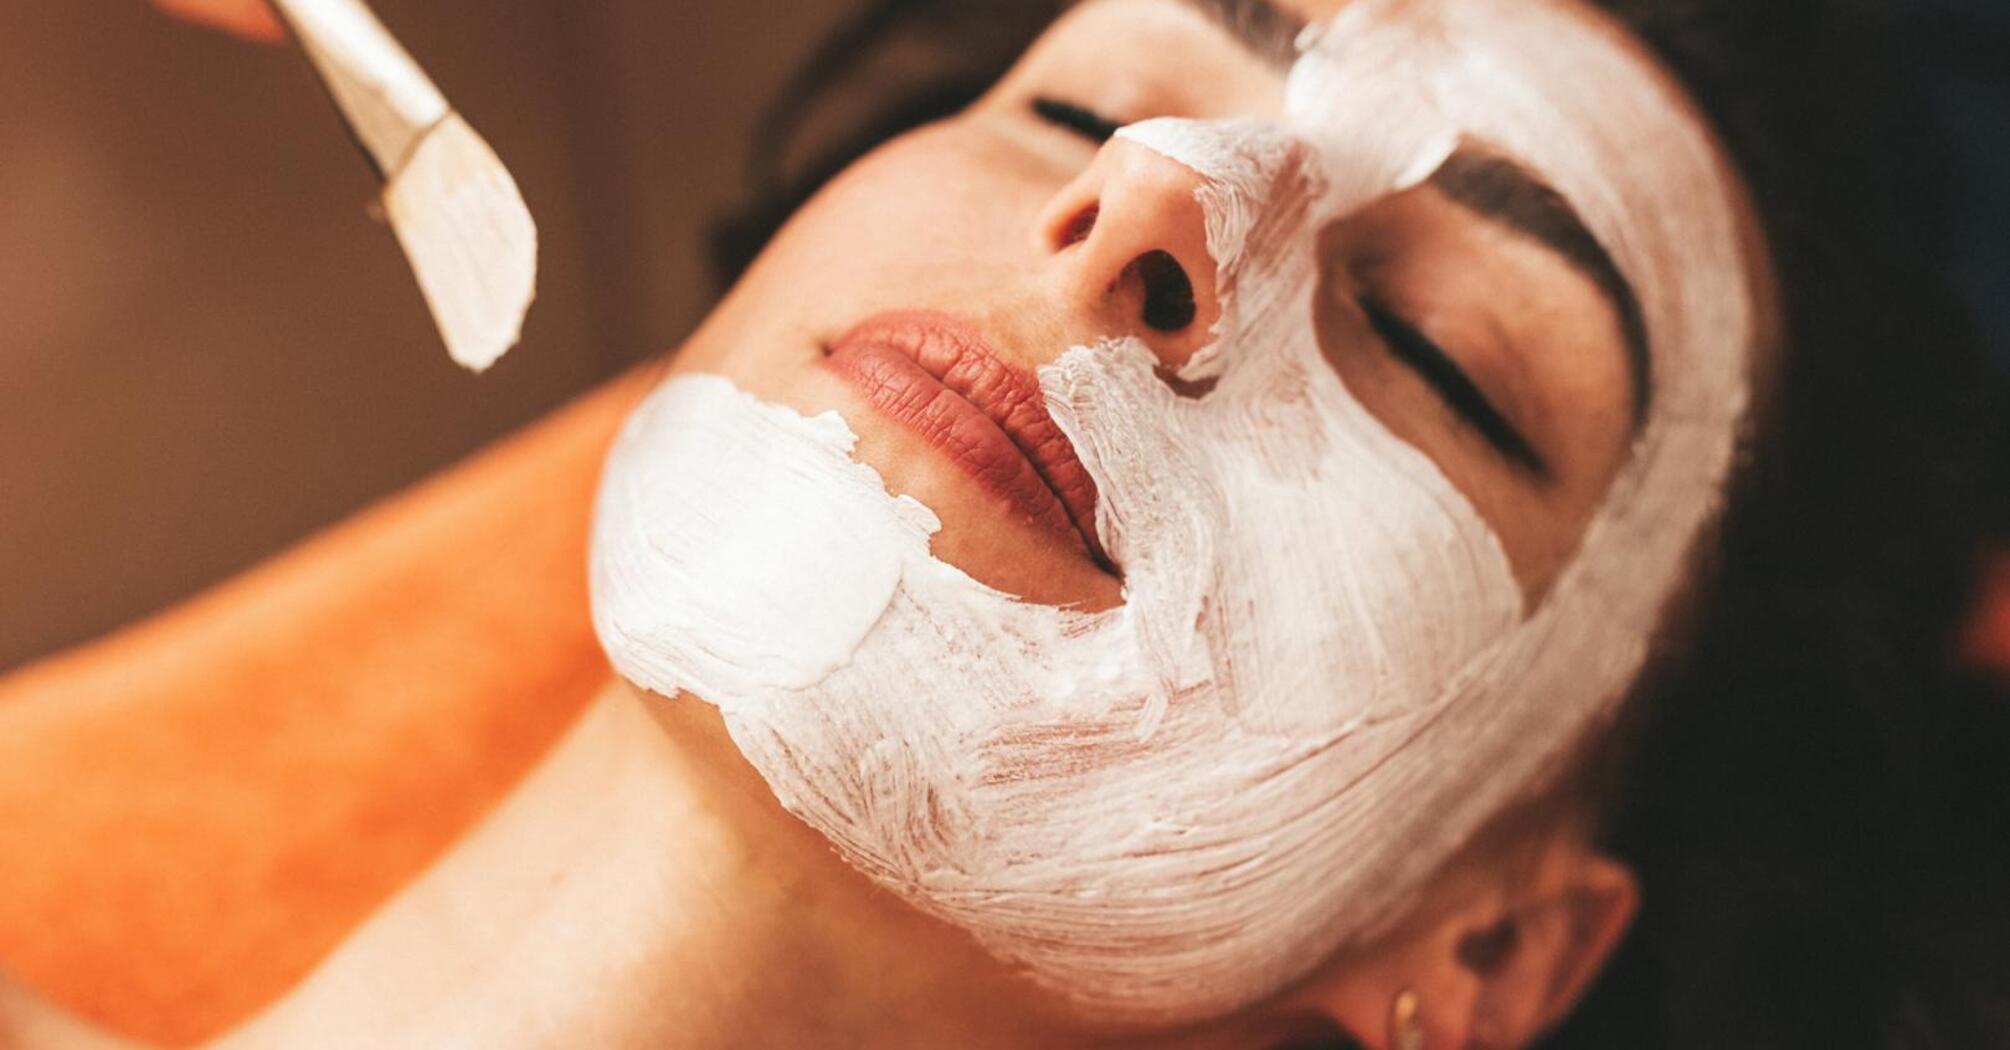 Pros and cons of alginate face masks